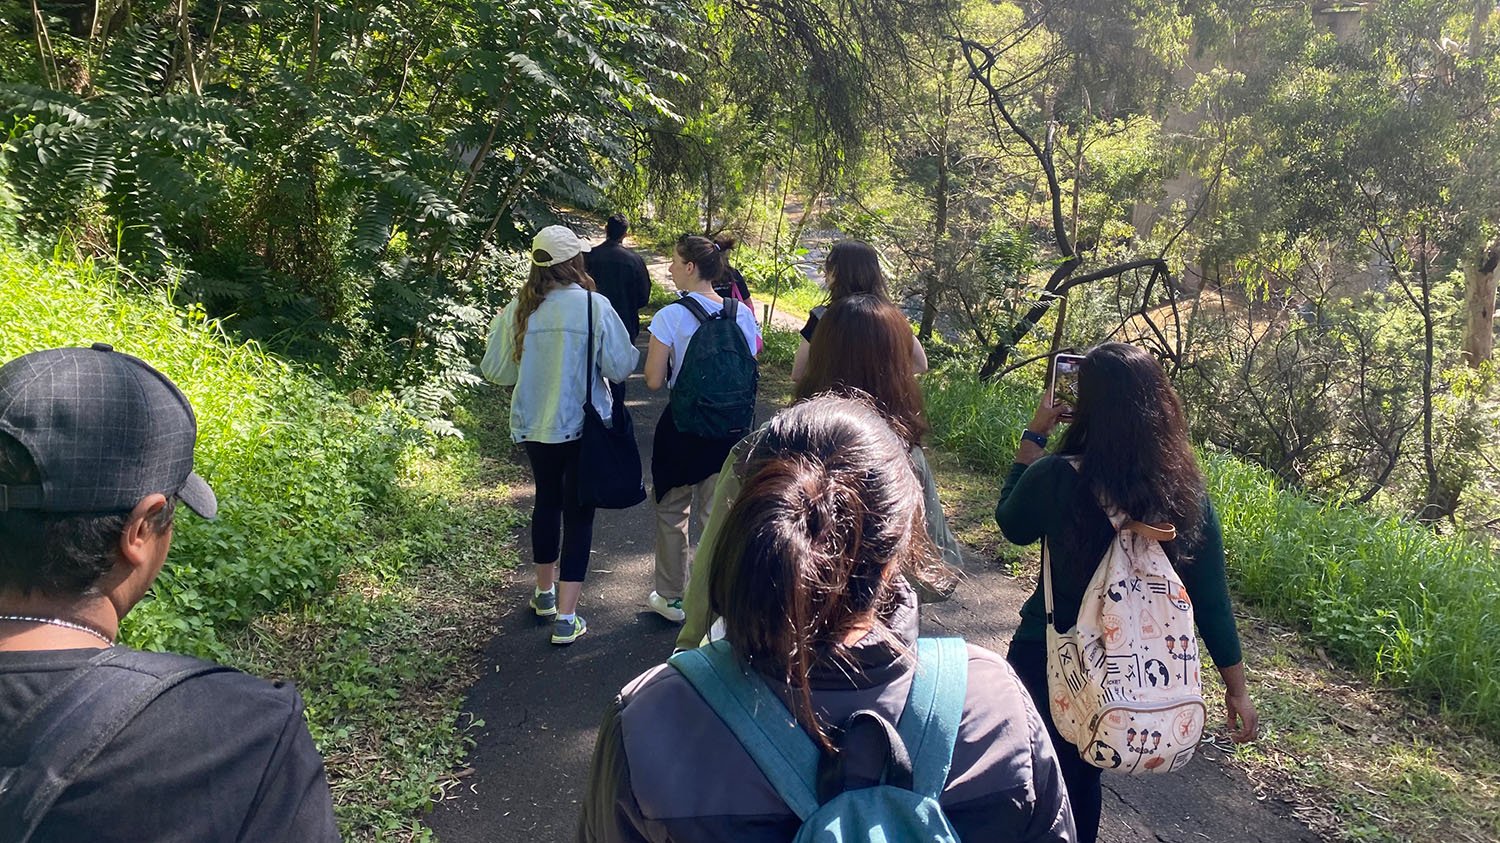 Students walking in nature